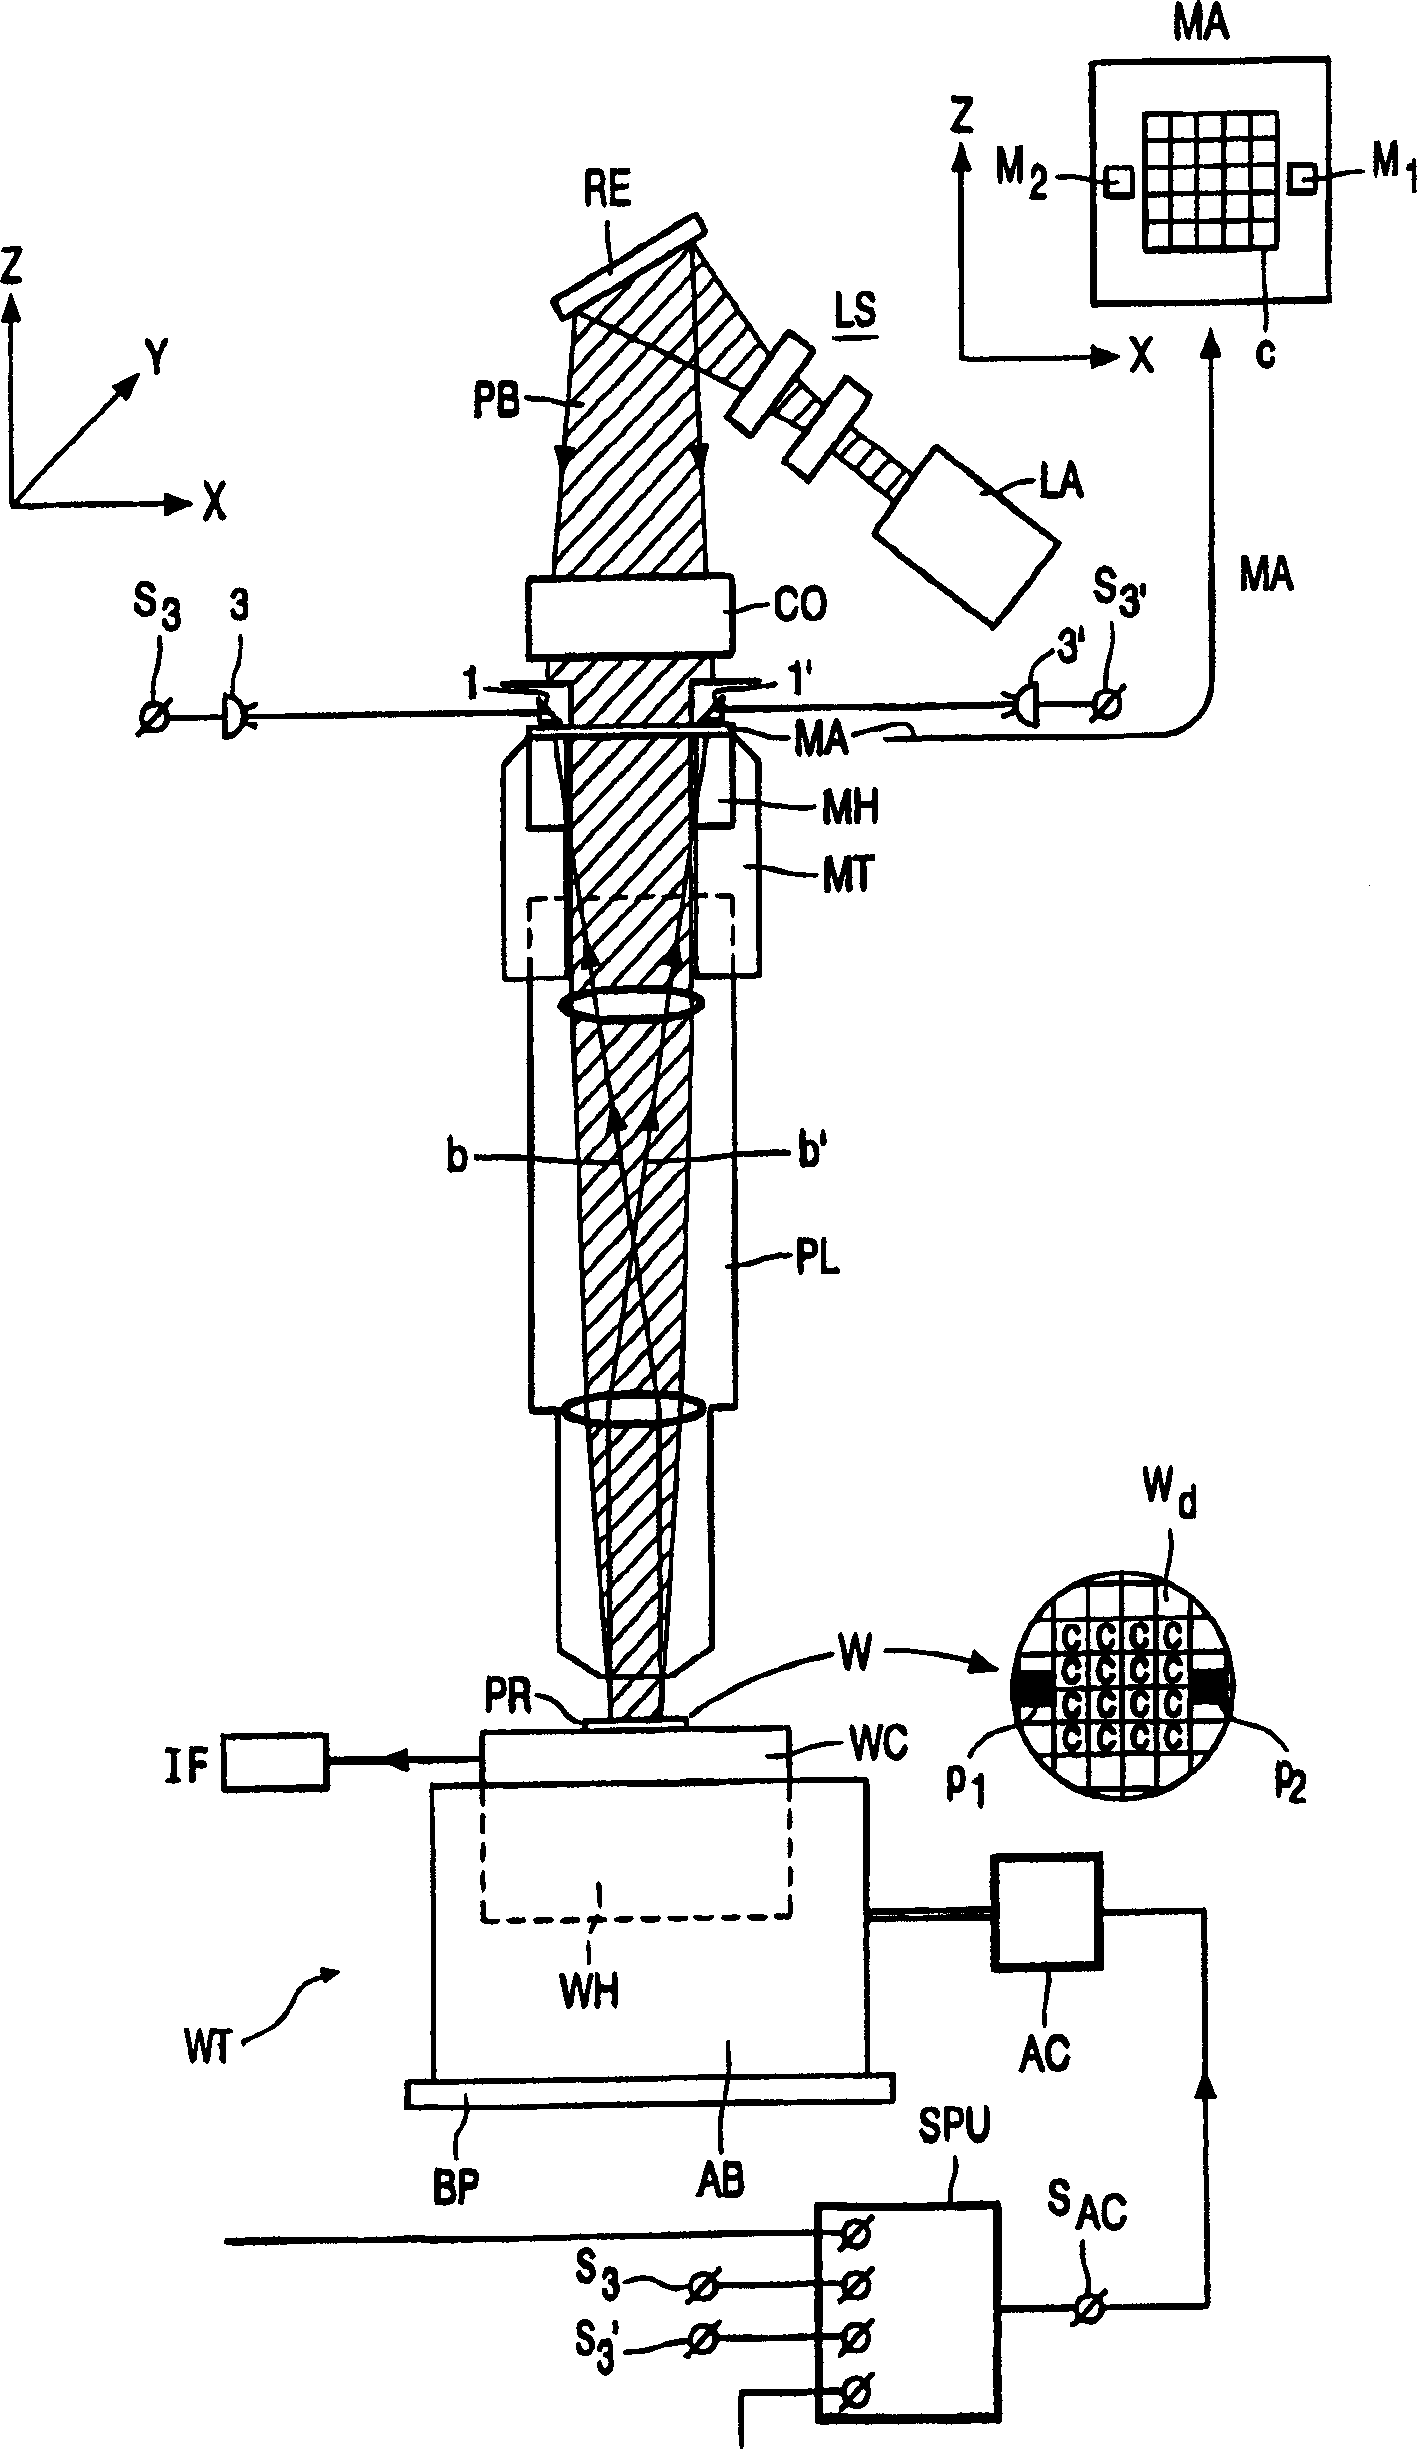 Lithographic method of manufacturing device